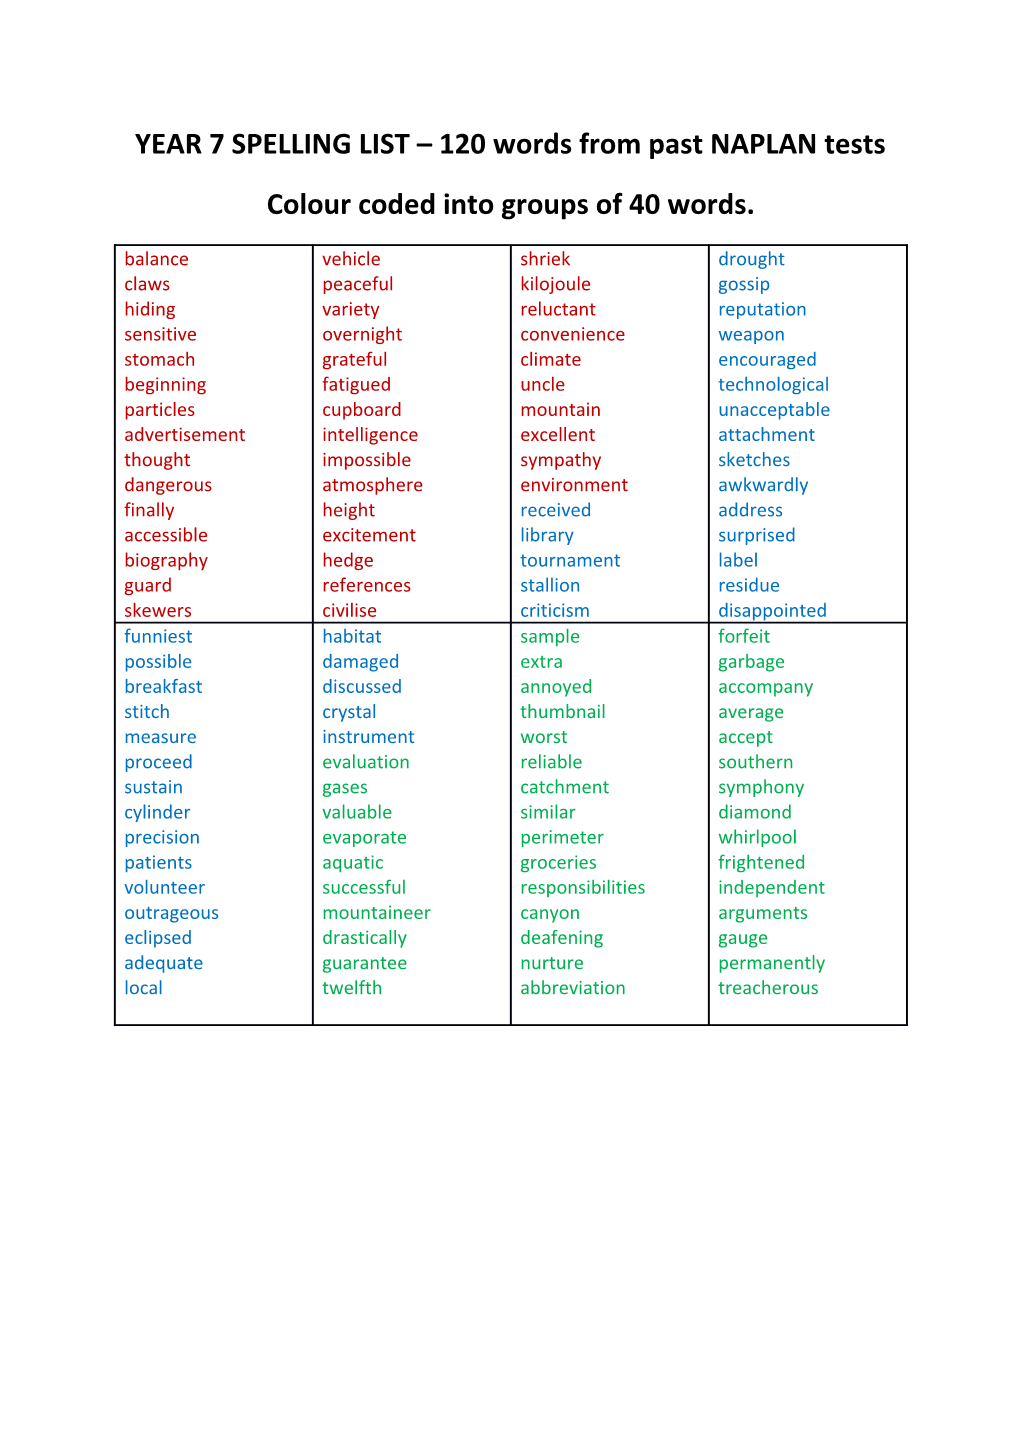 YEAR 7 SPELLING LIST 120 Words from Past NAPLAN Tests